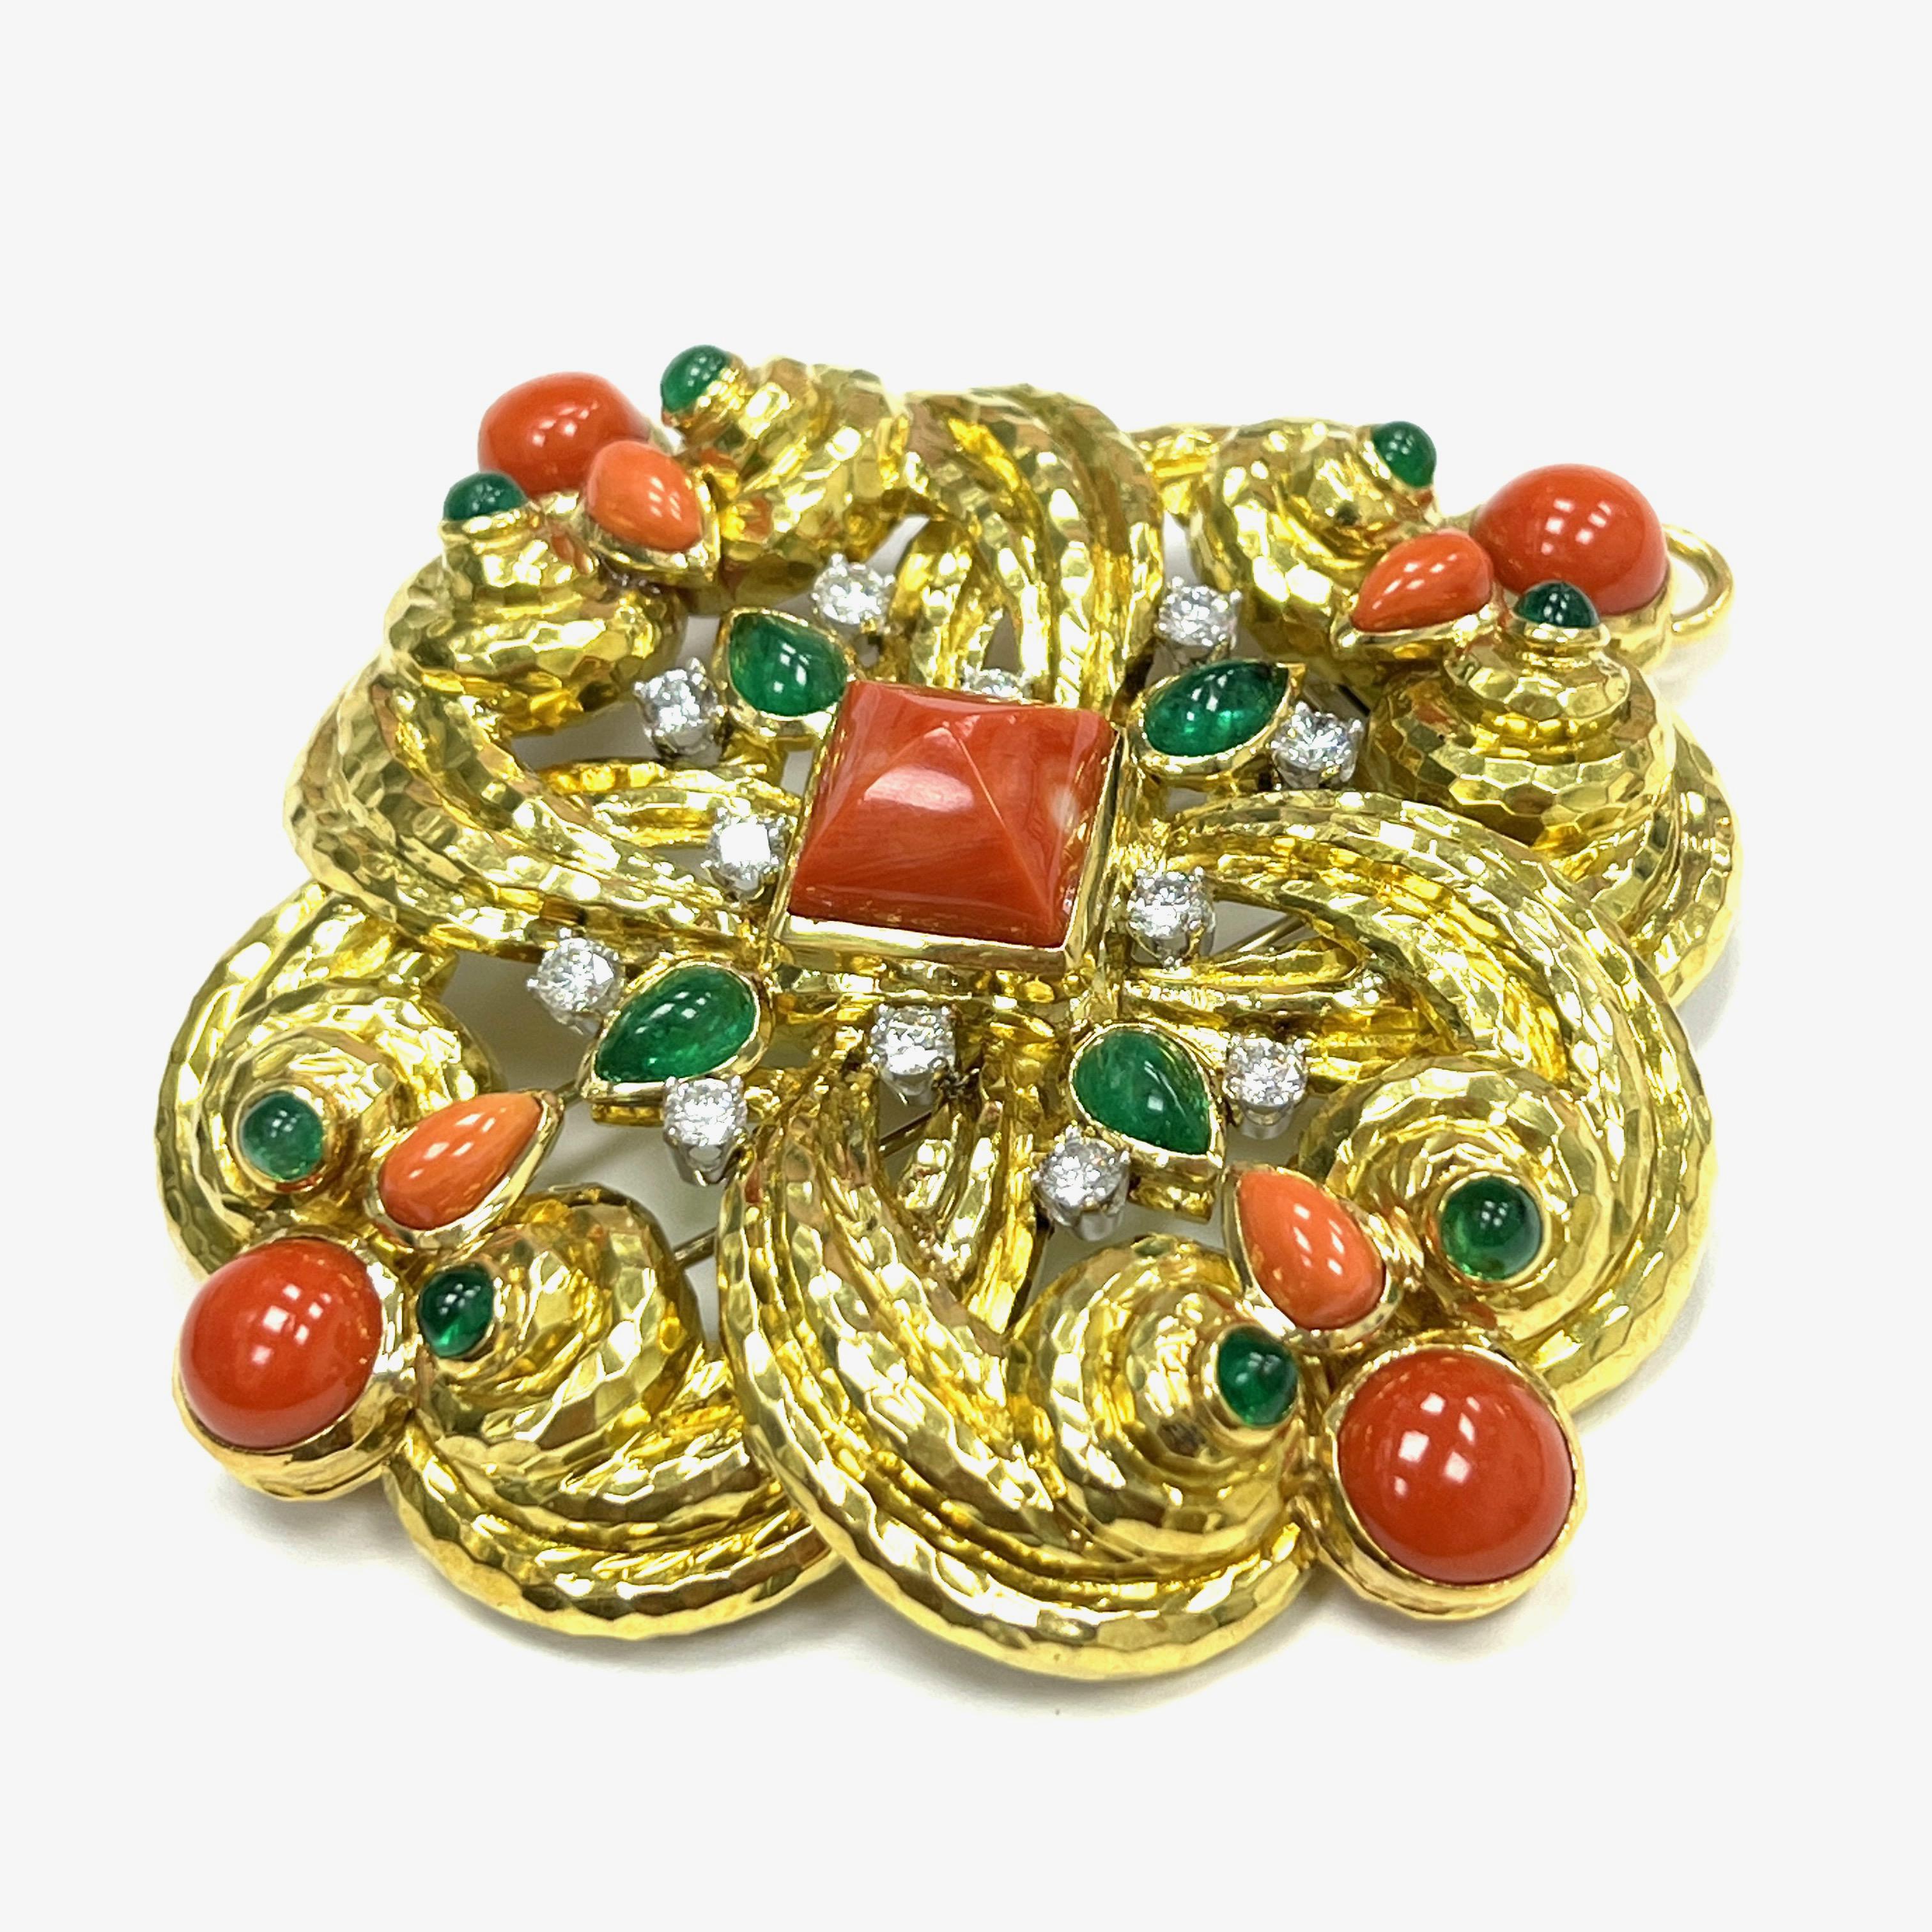 Uncut David Webb One of A Kind Coral Emerald 18k Yellow Gold Pendant Brooch  For Sale